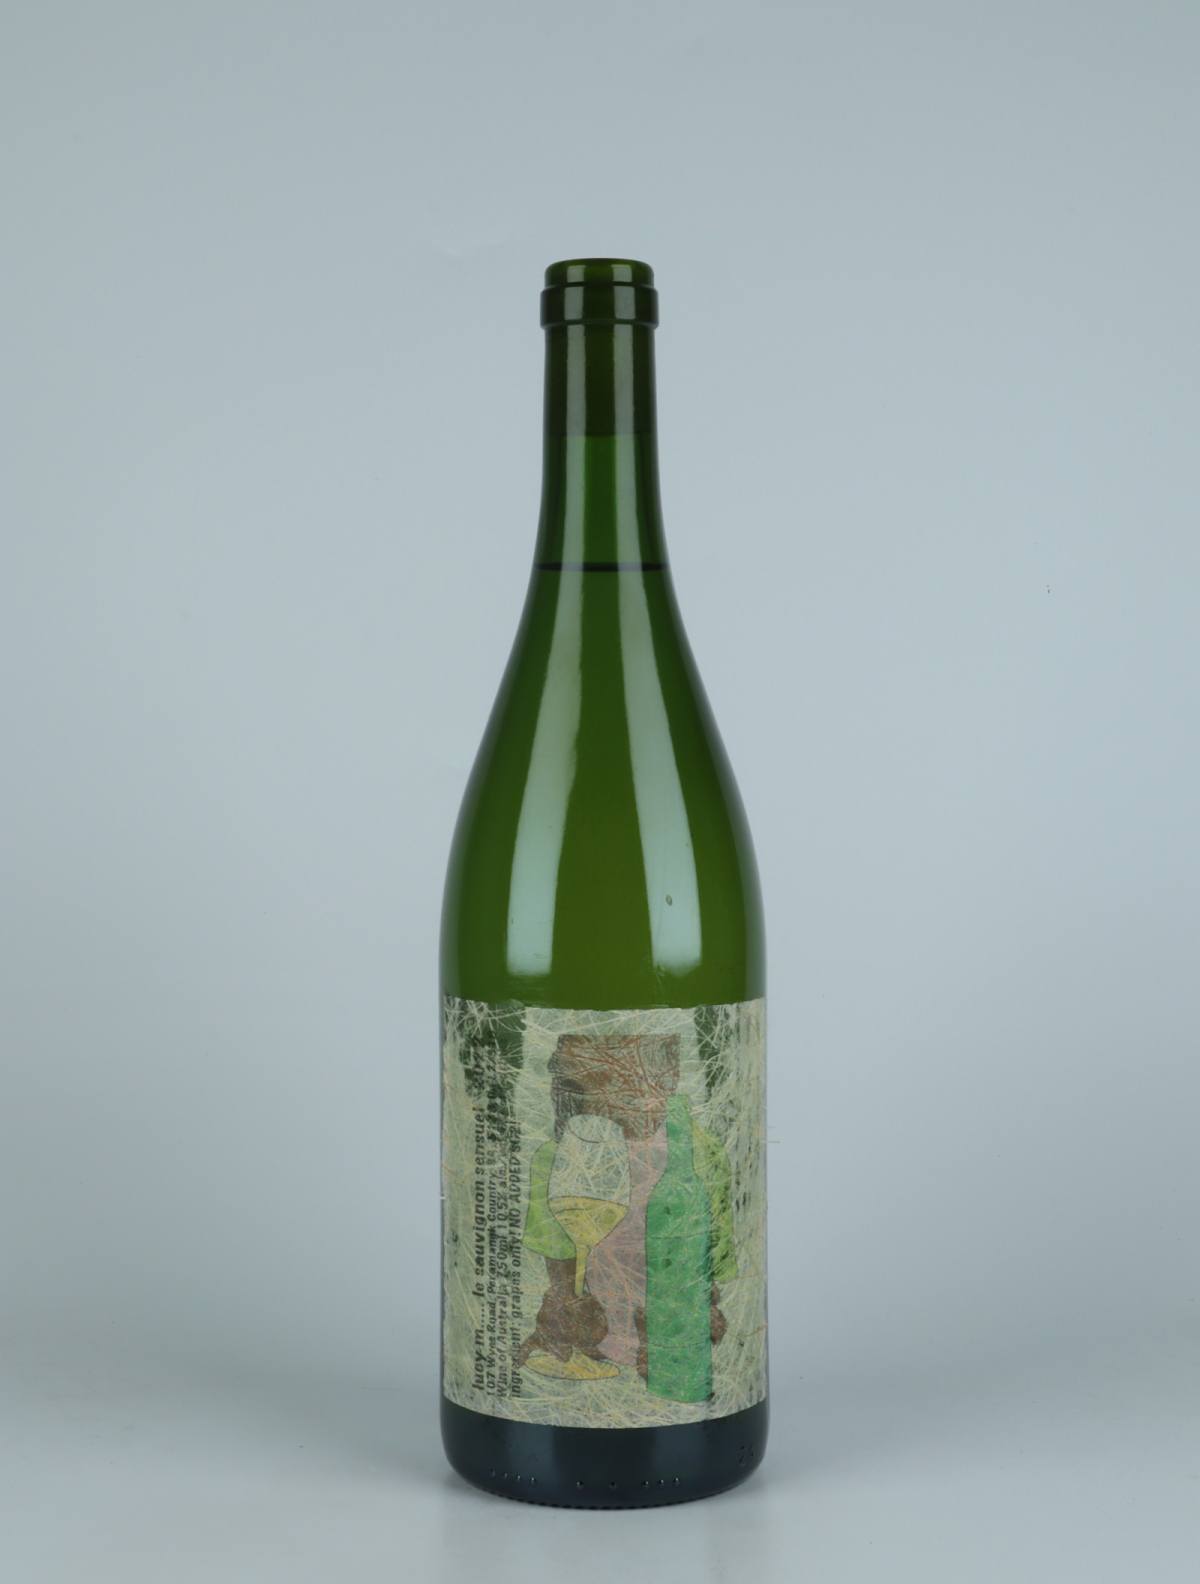 A bottle 2022 Le Sauvignon Sensuel White wine from Lucy Margaux, Adelaide Hills in Australia